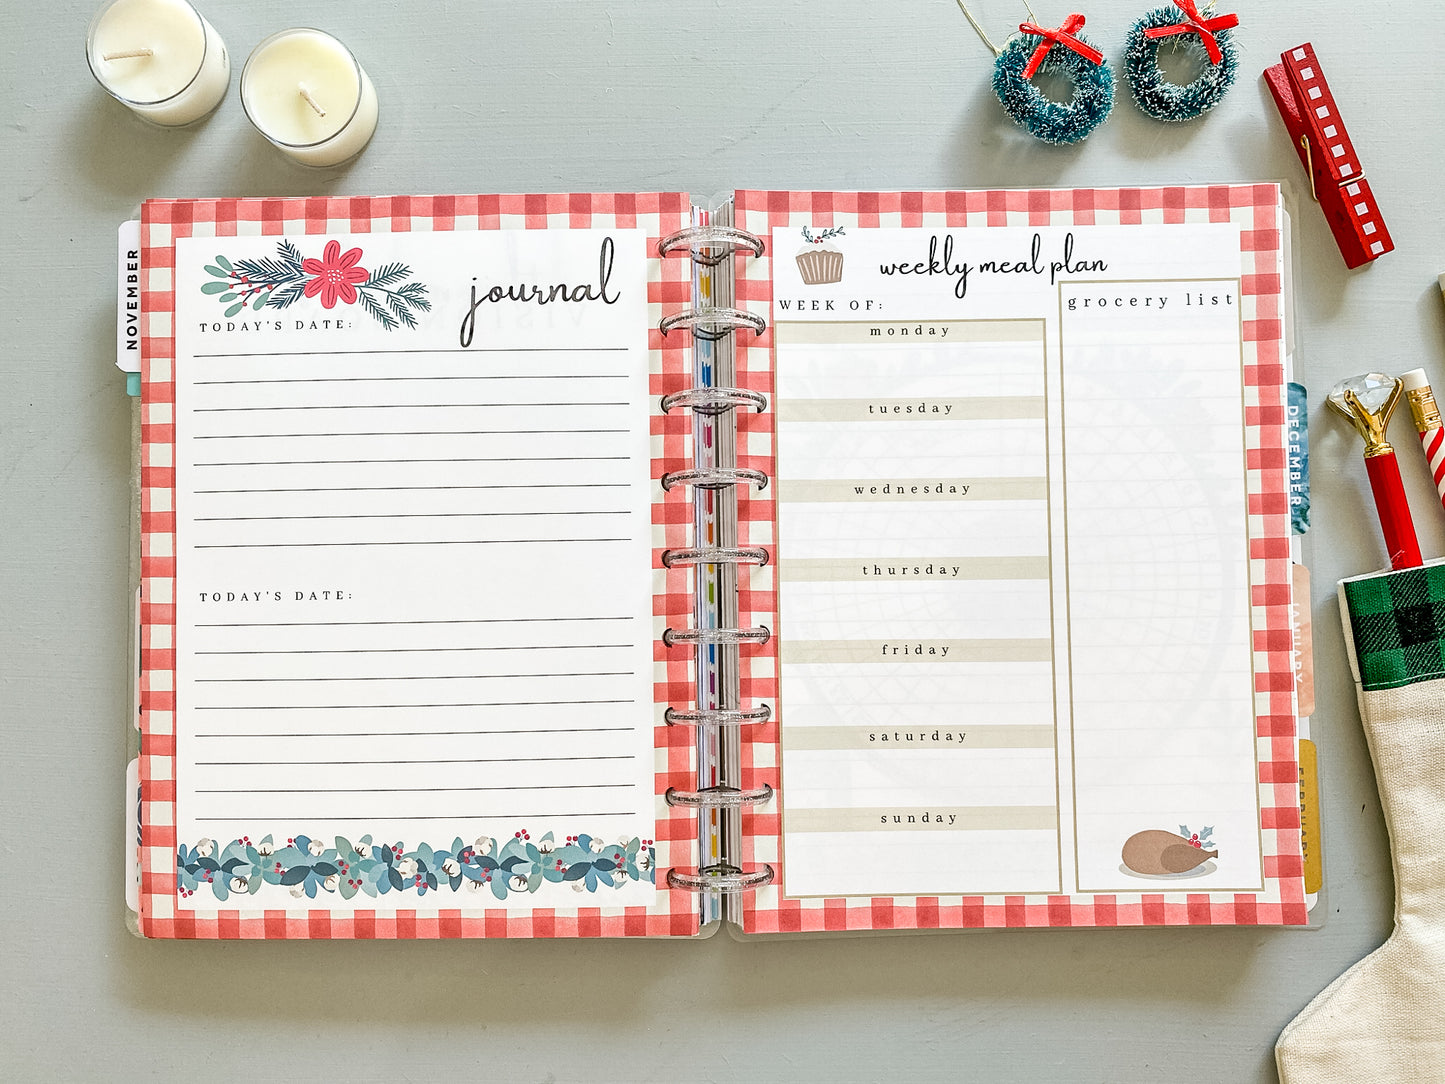 Printable Farmhouse Christmas Planner Inserts for Happy Planner